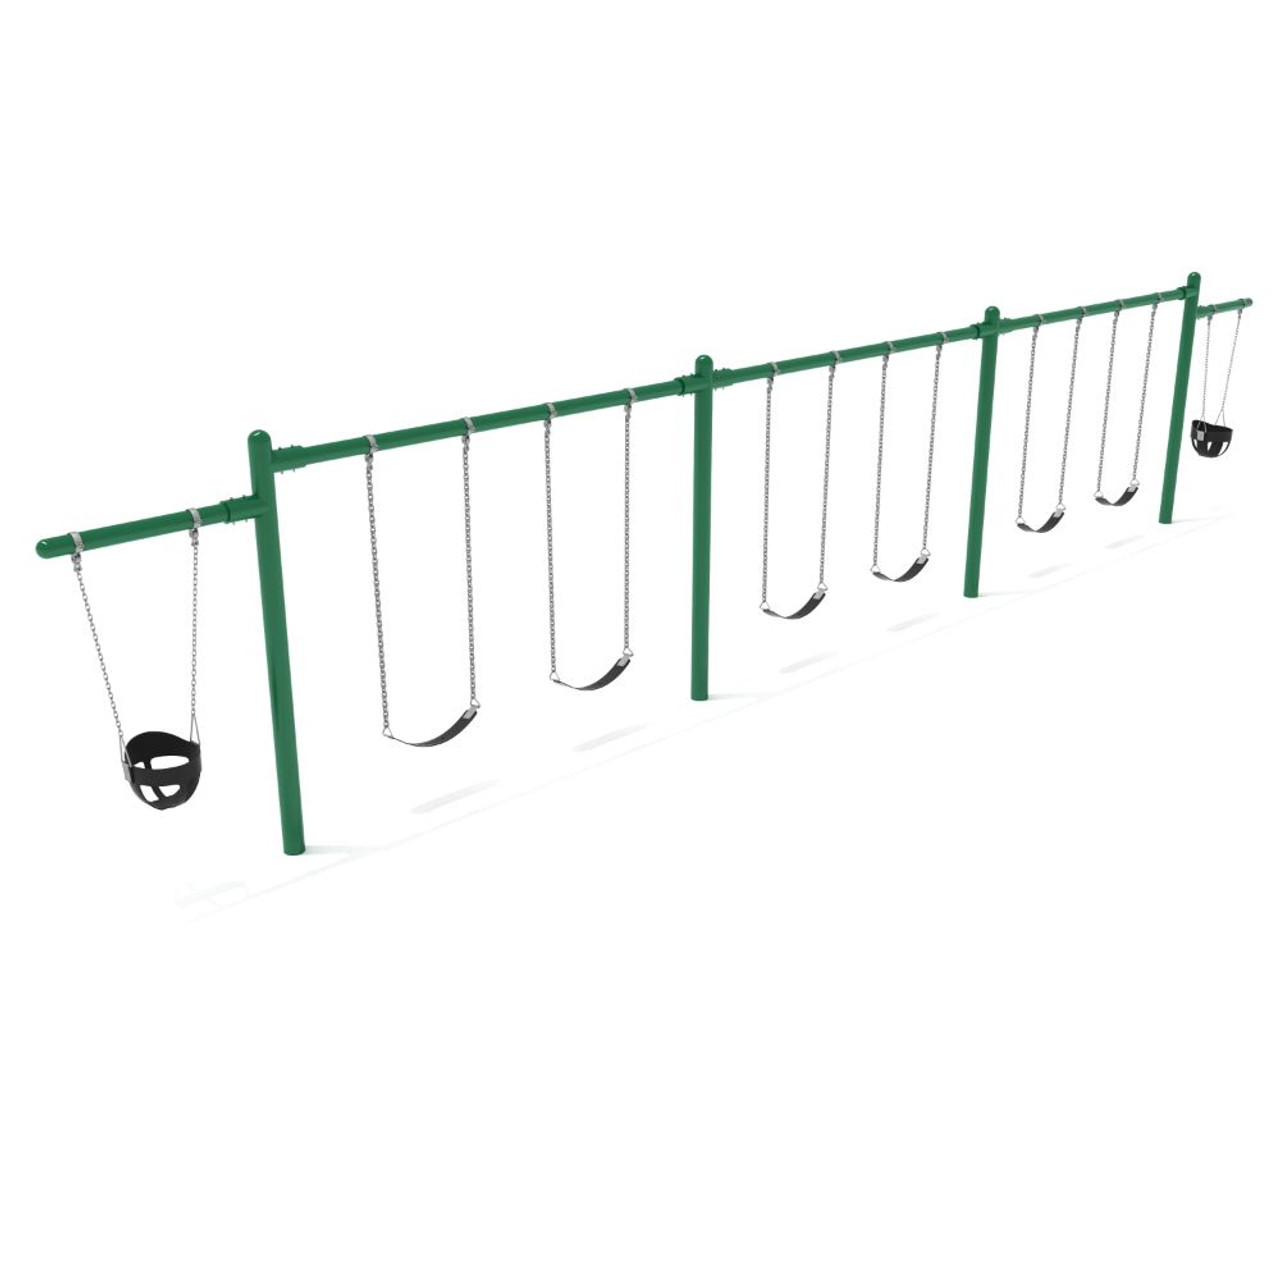 Elite Cantilever Swing - 3 Bays 2 Cantilevers - Green